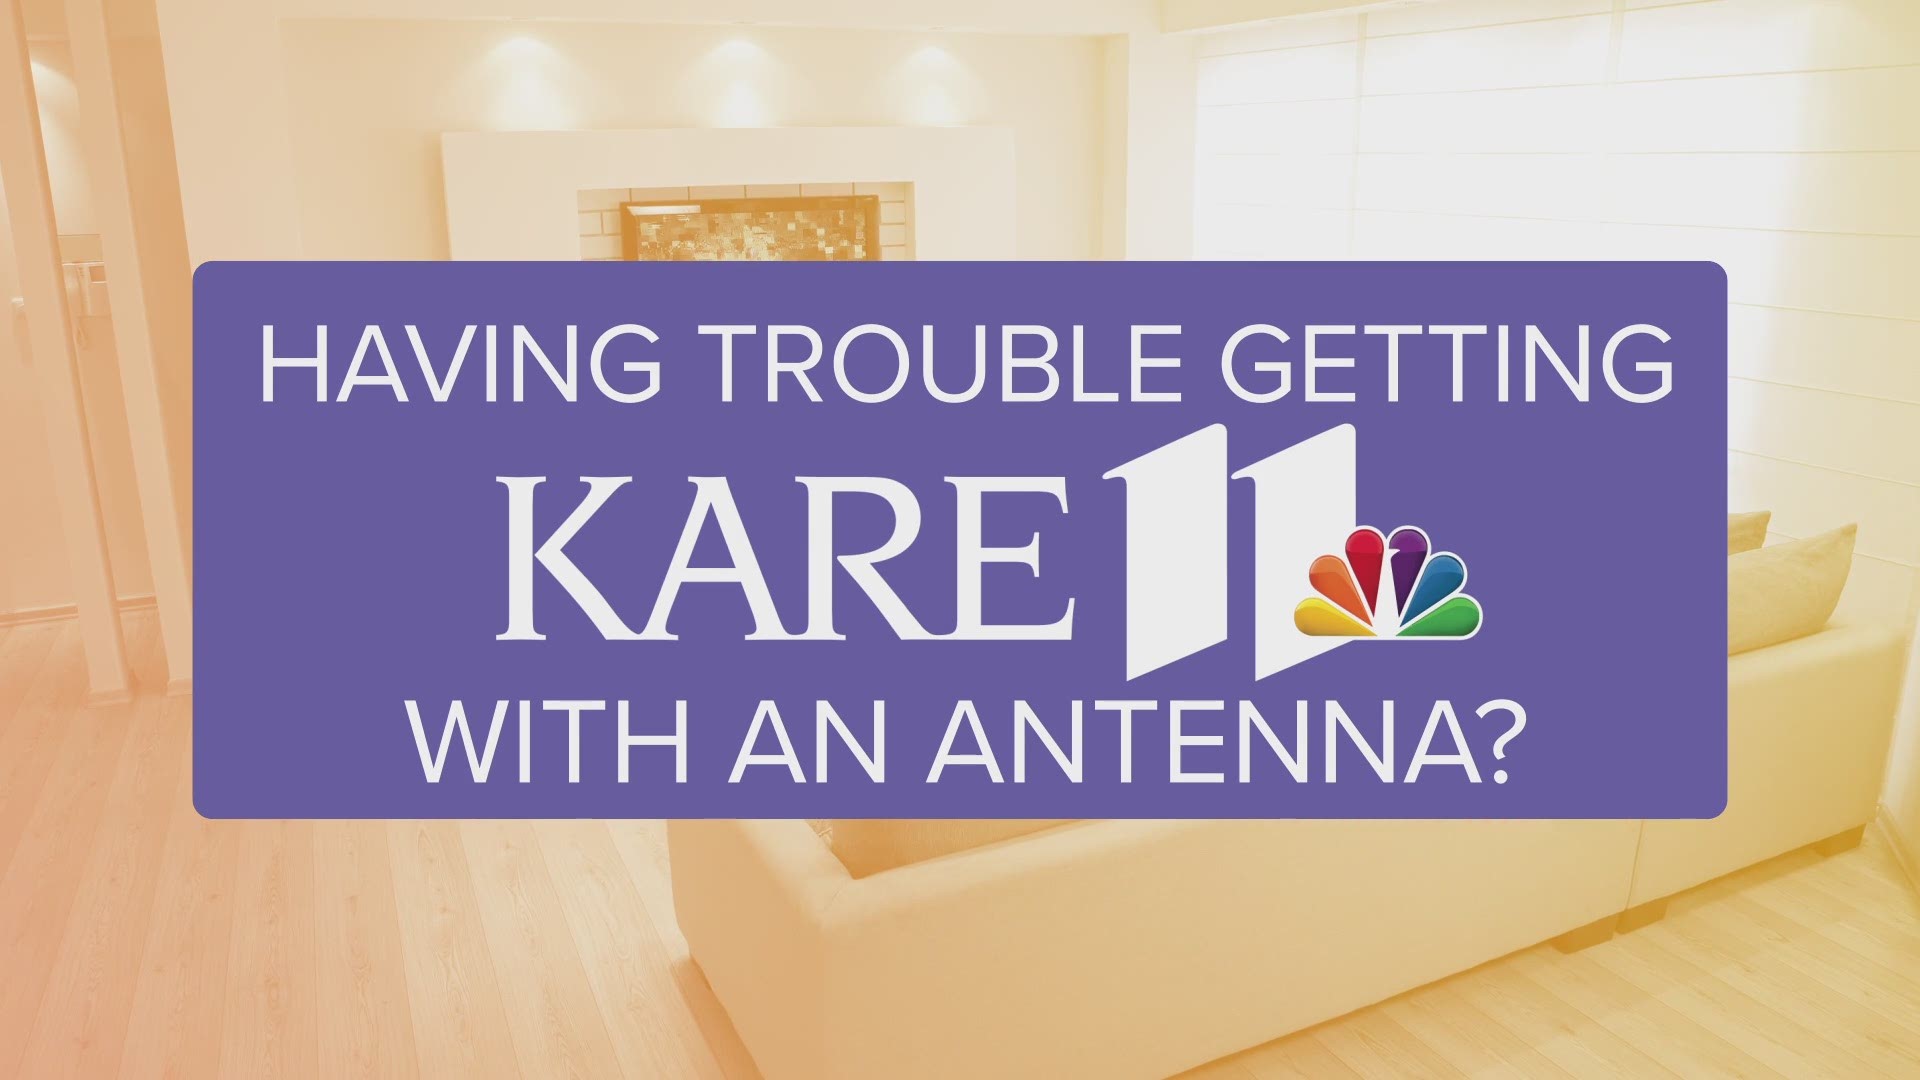 Here's a step-by-step guide to getting KARE 11 via an antenna, just in time for Sunday Night Football.